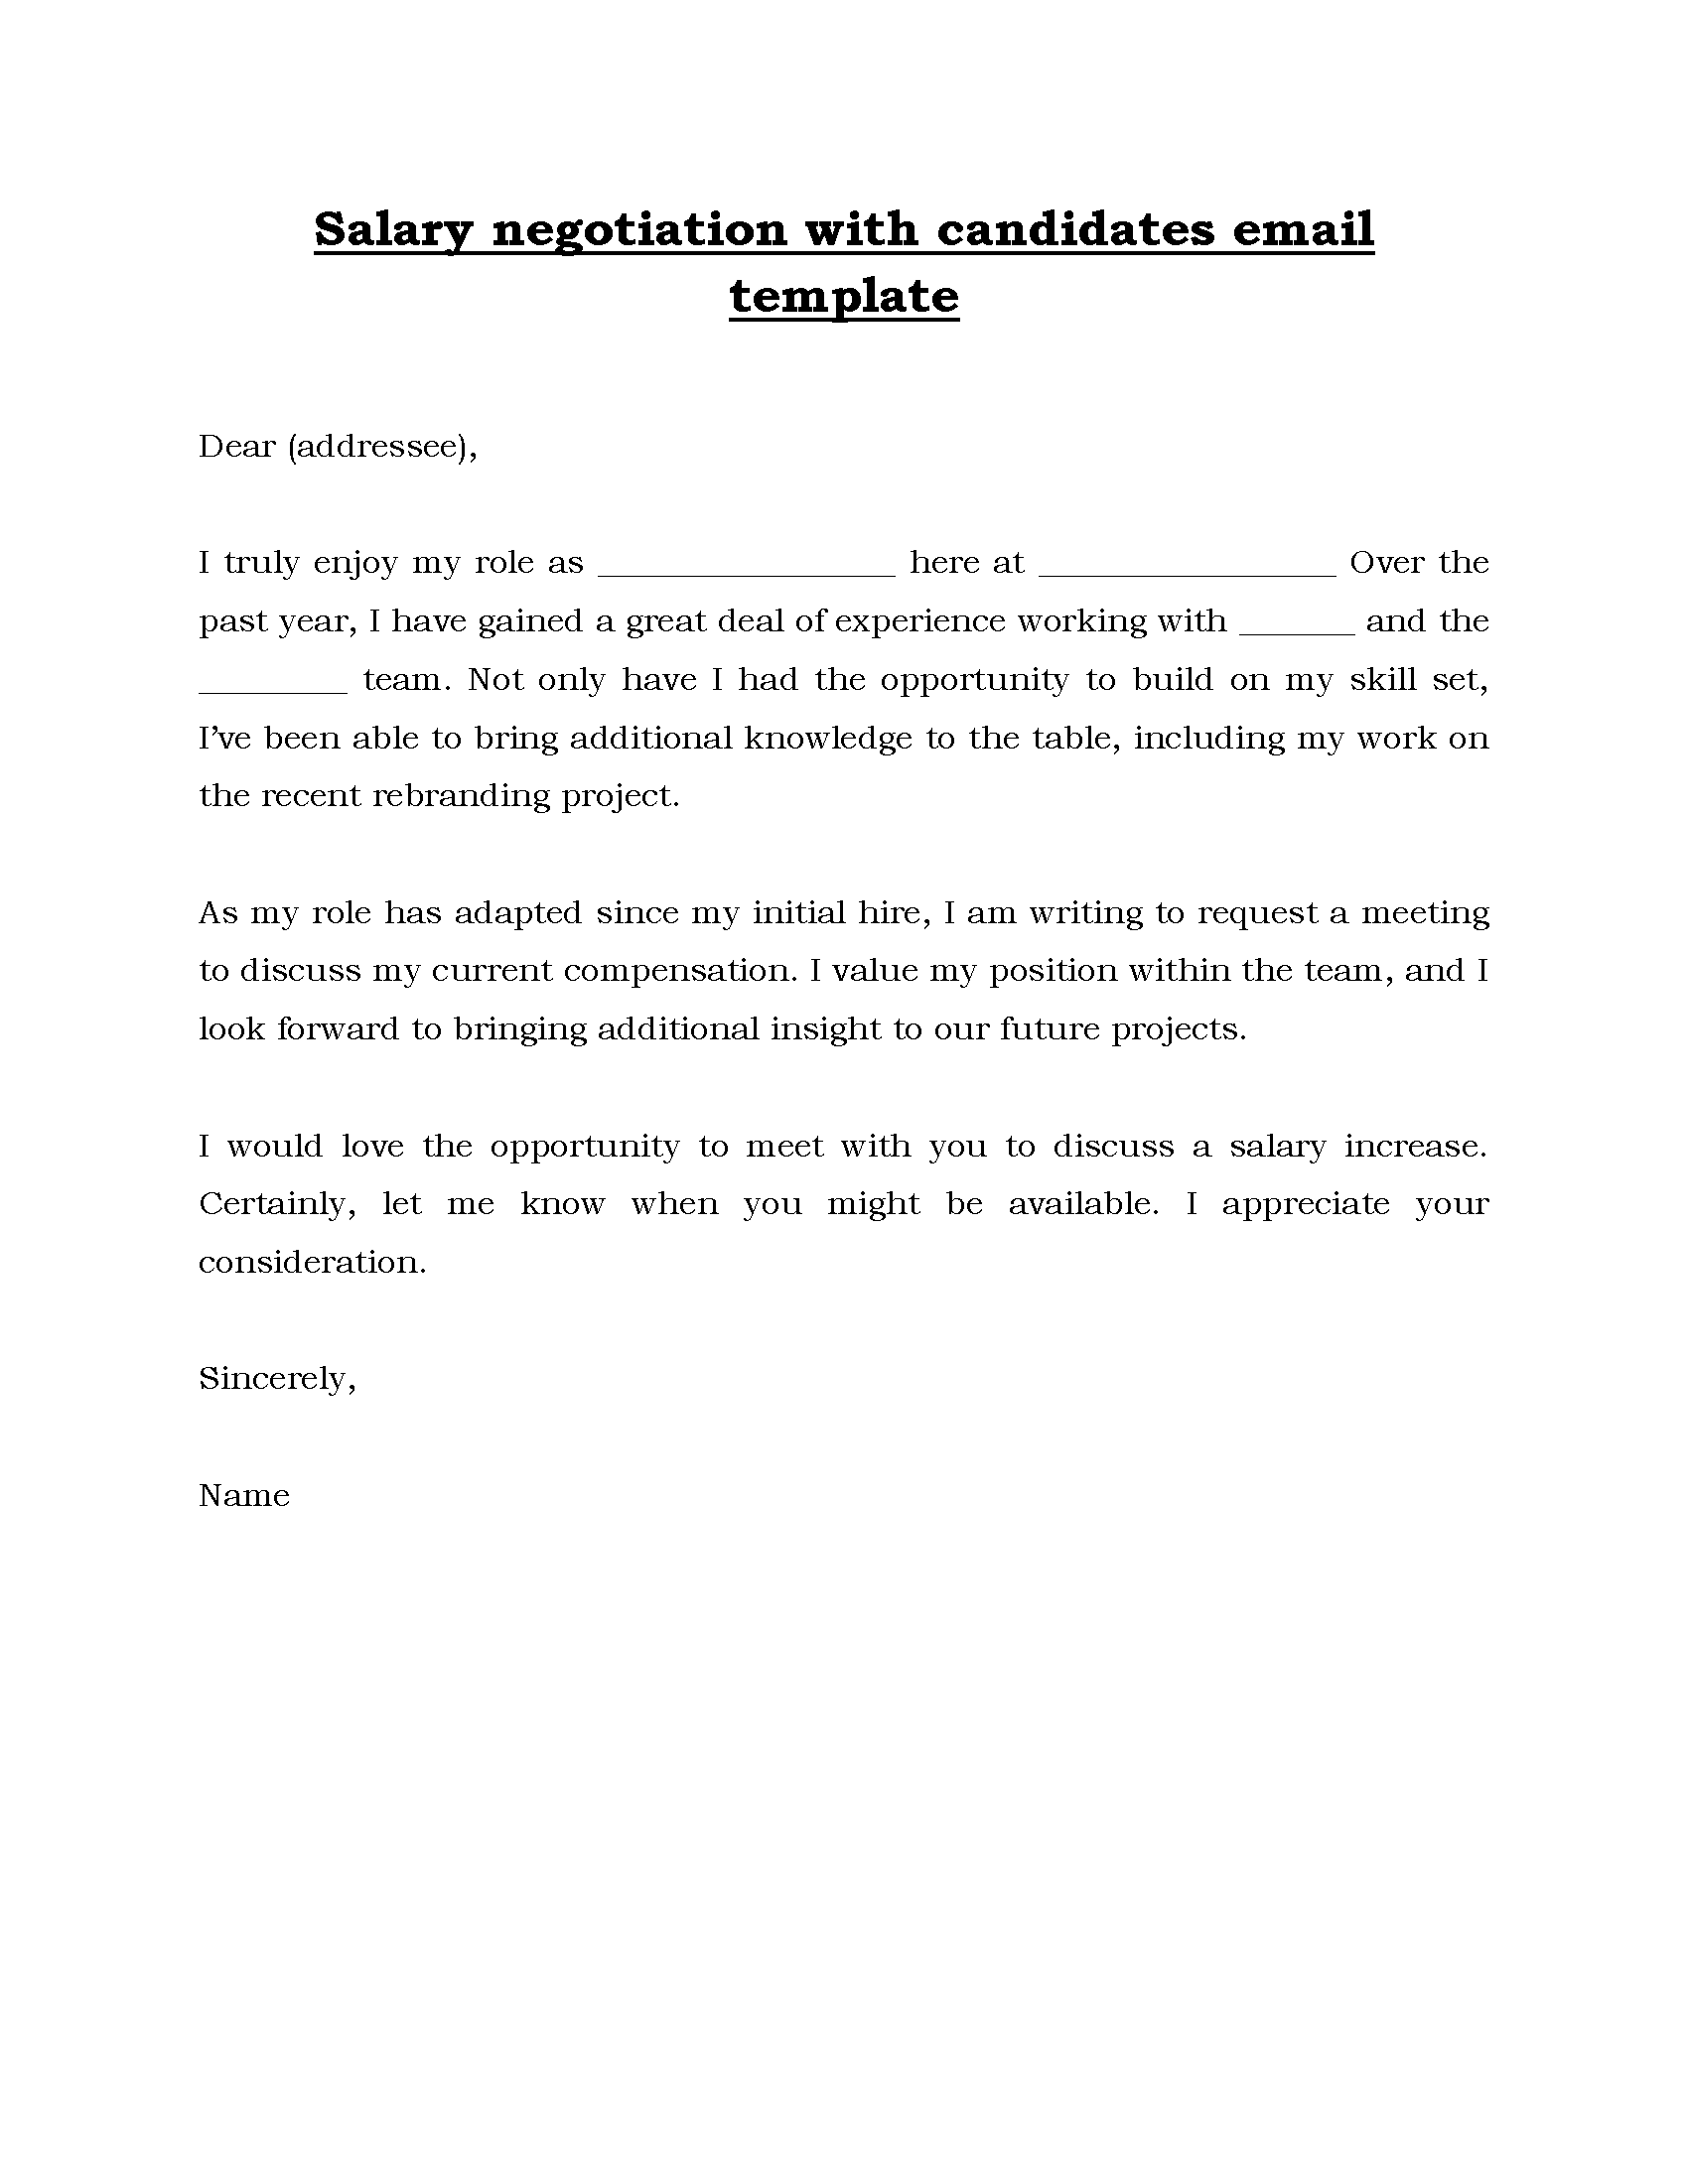 10- Salary-negotiation-with-candidates-email-template